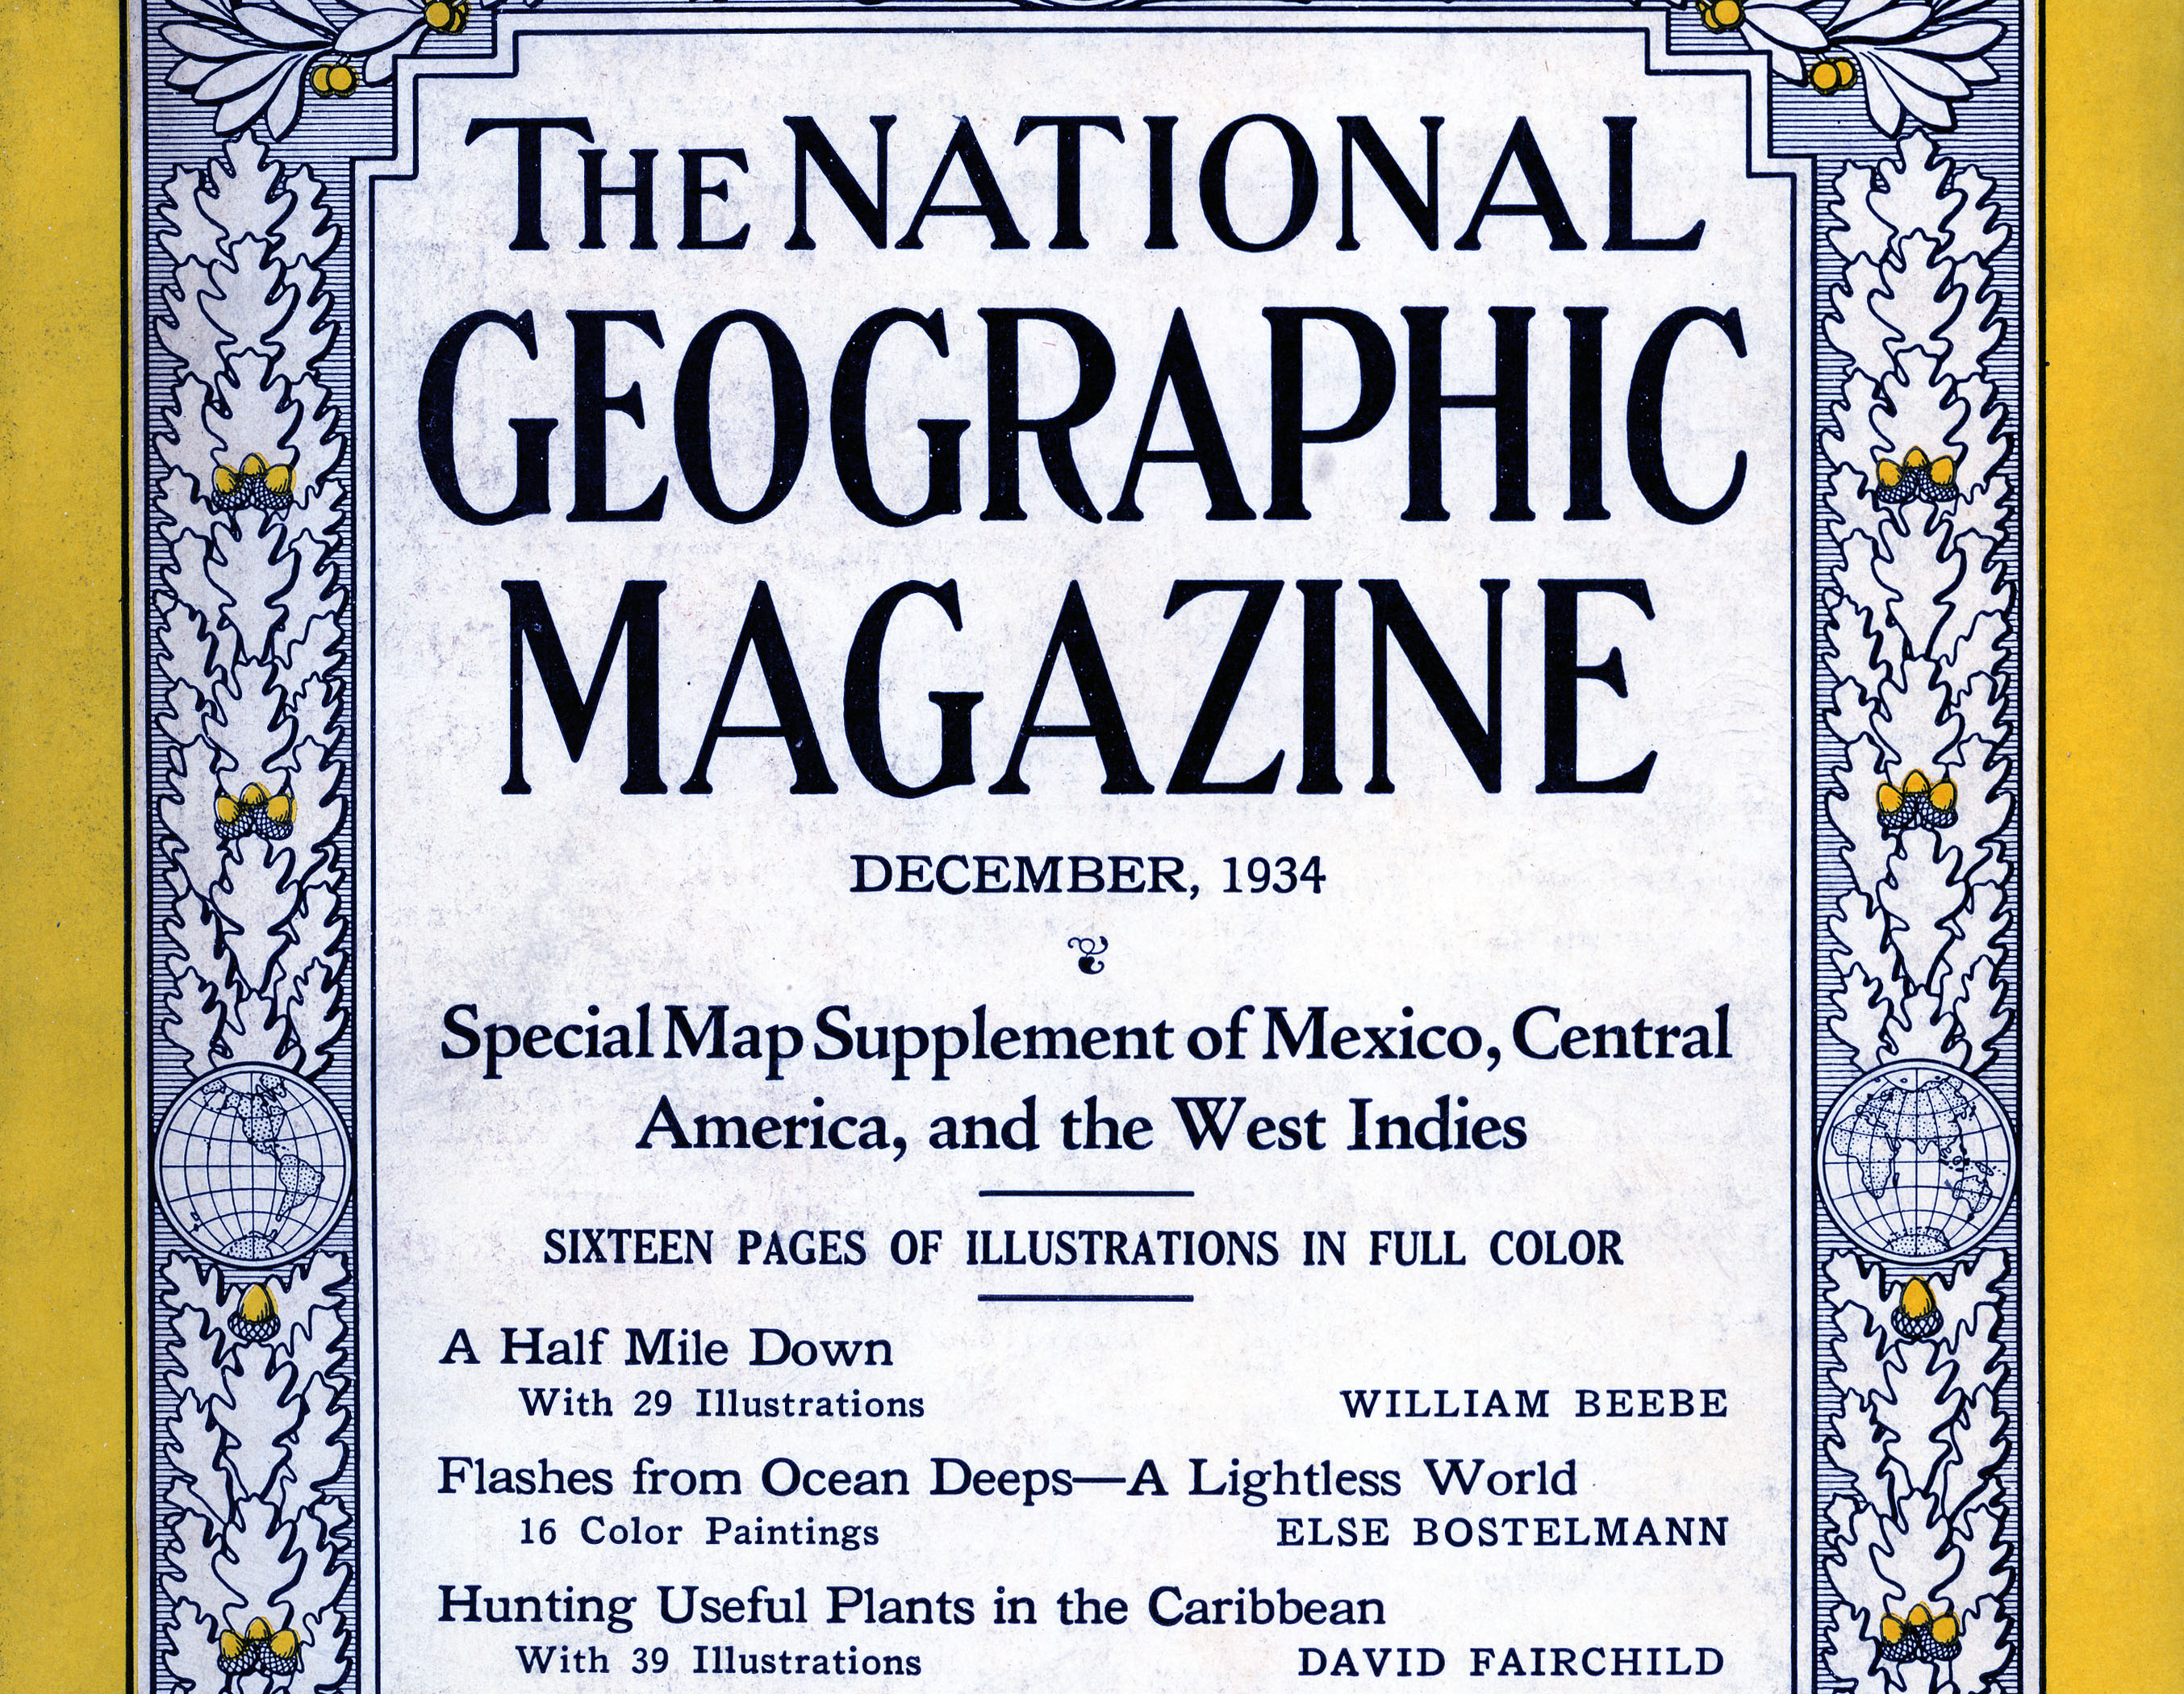 Portion of cover of National Geographic Magazine, December 1934.